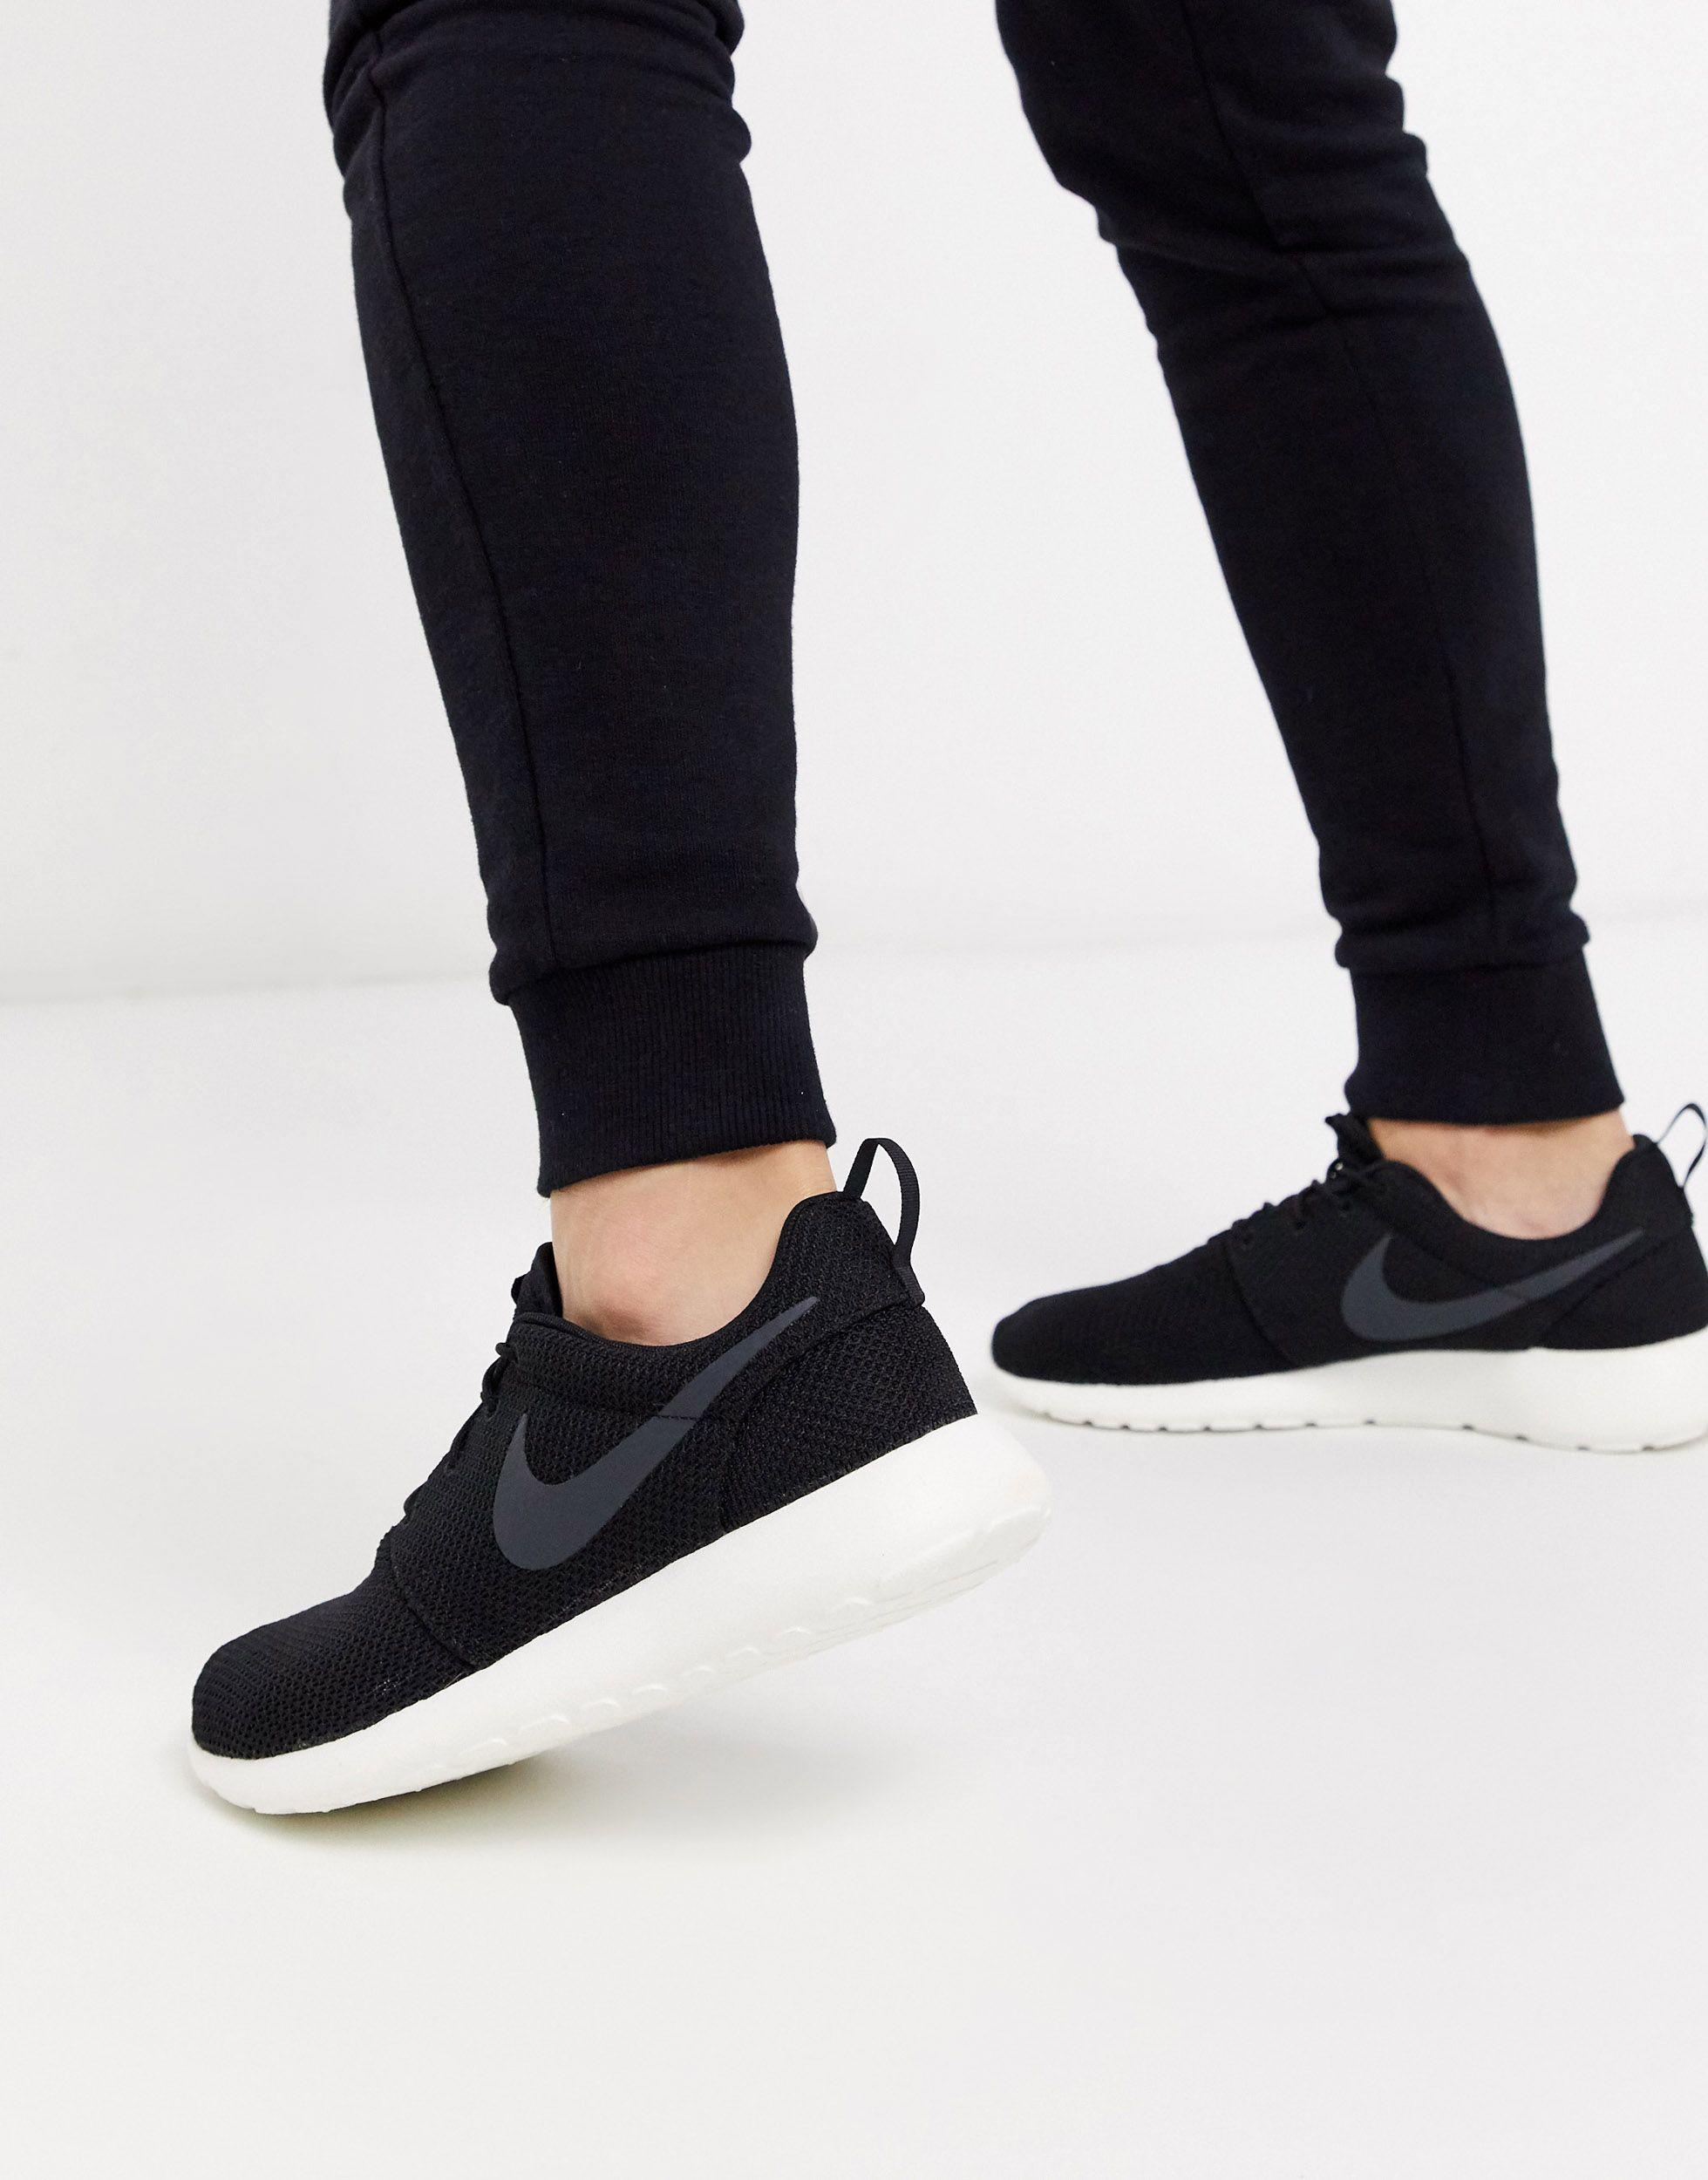 Nike Synthetic Roshe One - Shoes in Black/White (Black) for Men - Save 43%  | Lyst